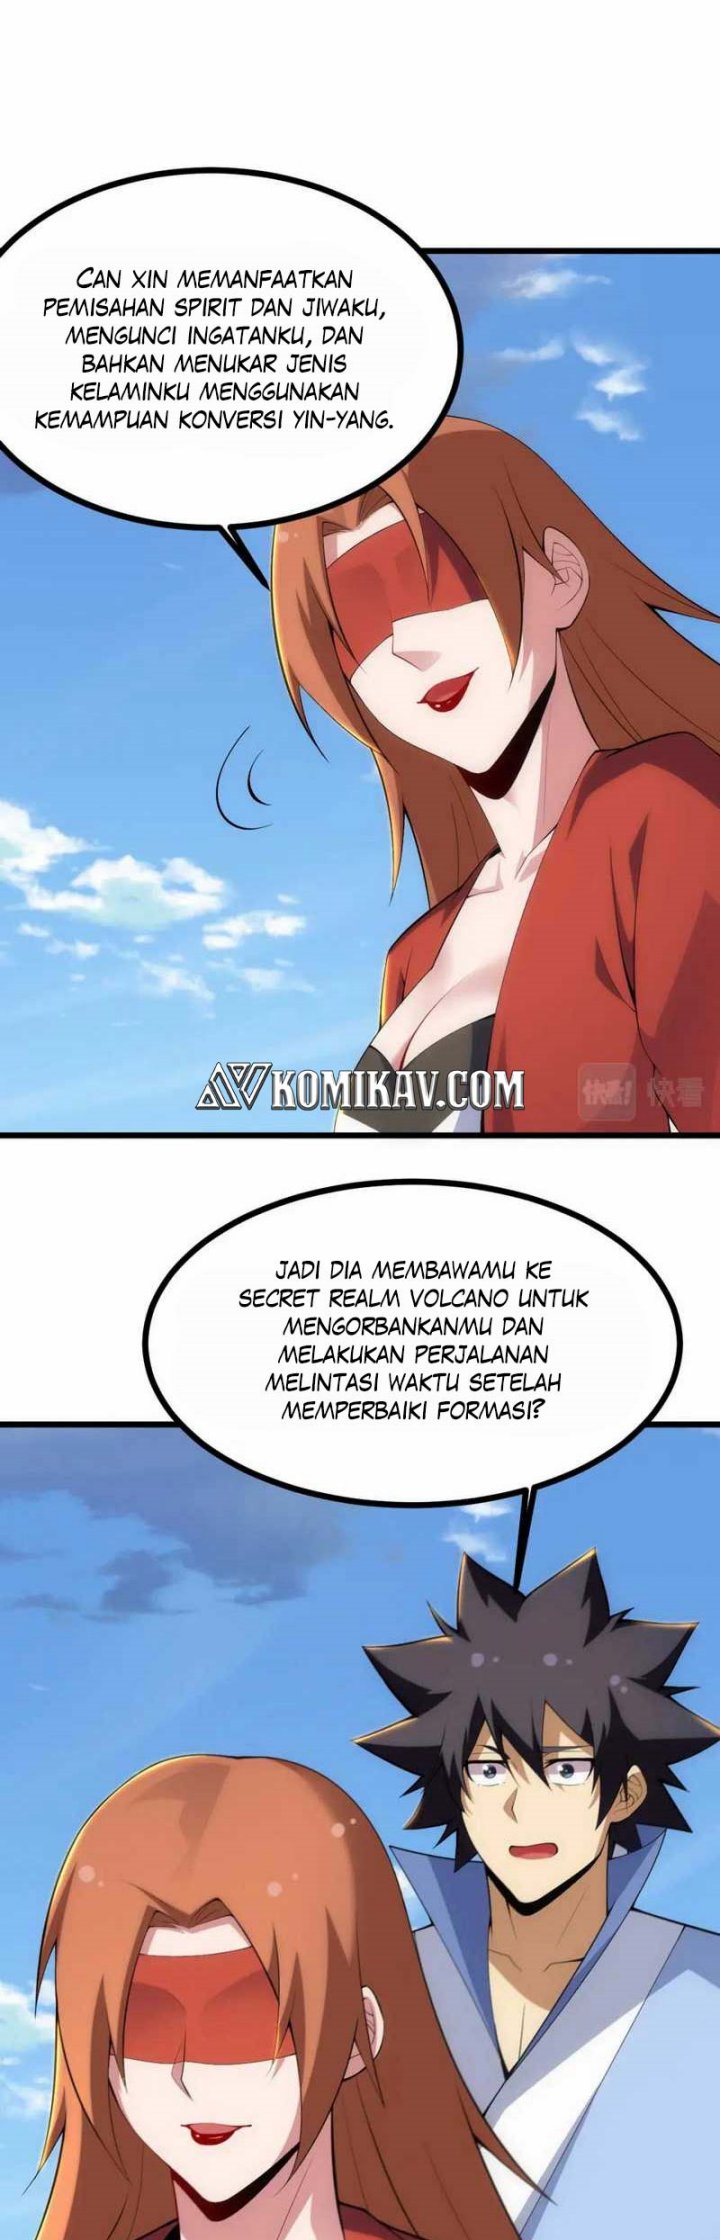 Dilarang COPAS - situs resmi www.mangacanblog.com - Komik i just want to be beaten to death by everyone 179 - chapter 179 180 Indonesia i just want to be beaten to death by everyone 179 - chapter 179 Terbaru 10|Baca Manga Komik Indonesia|Mangacan